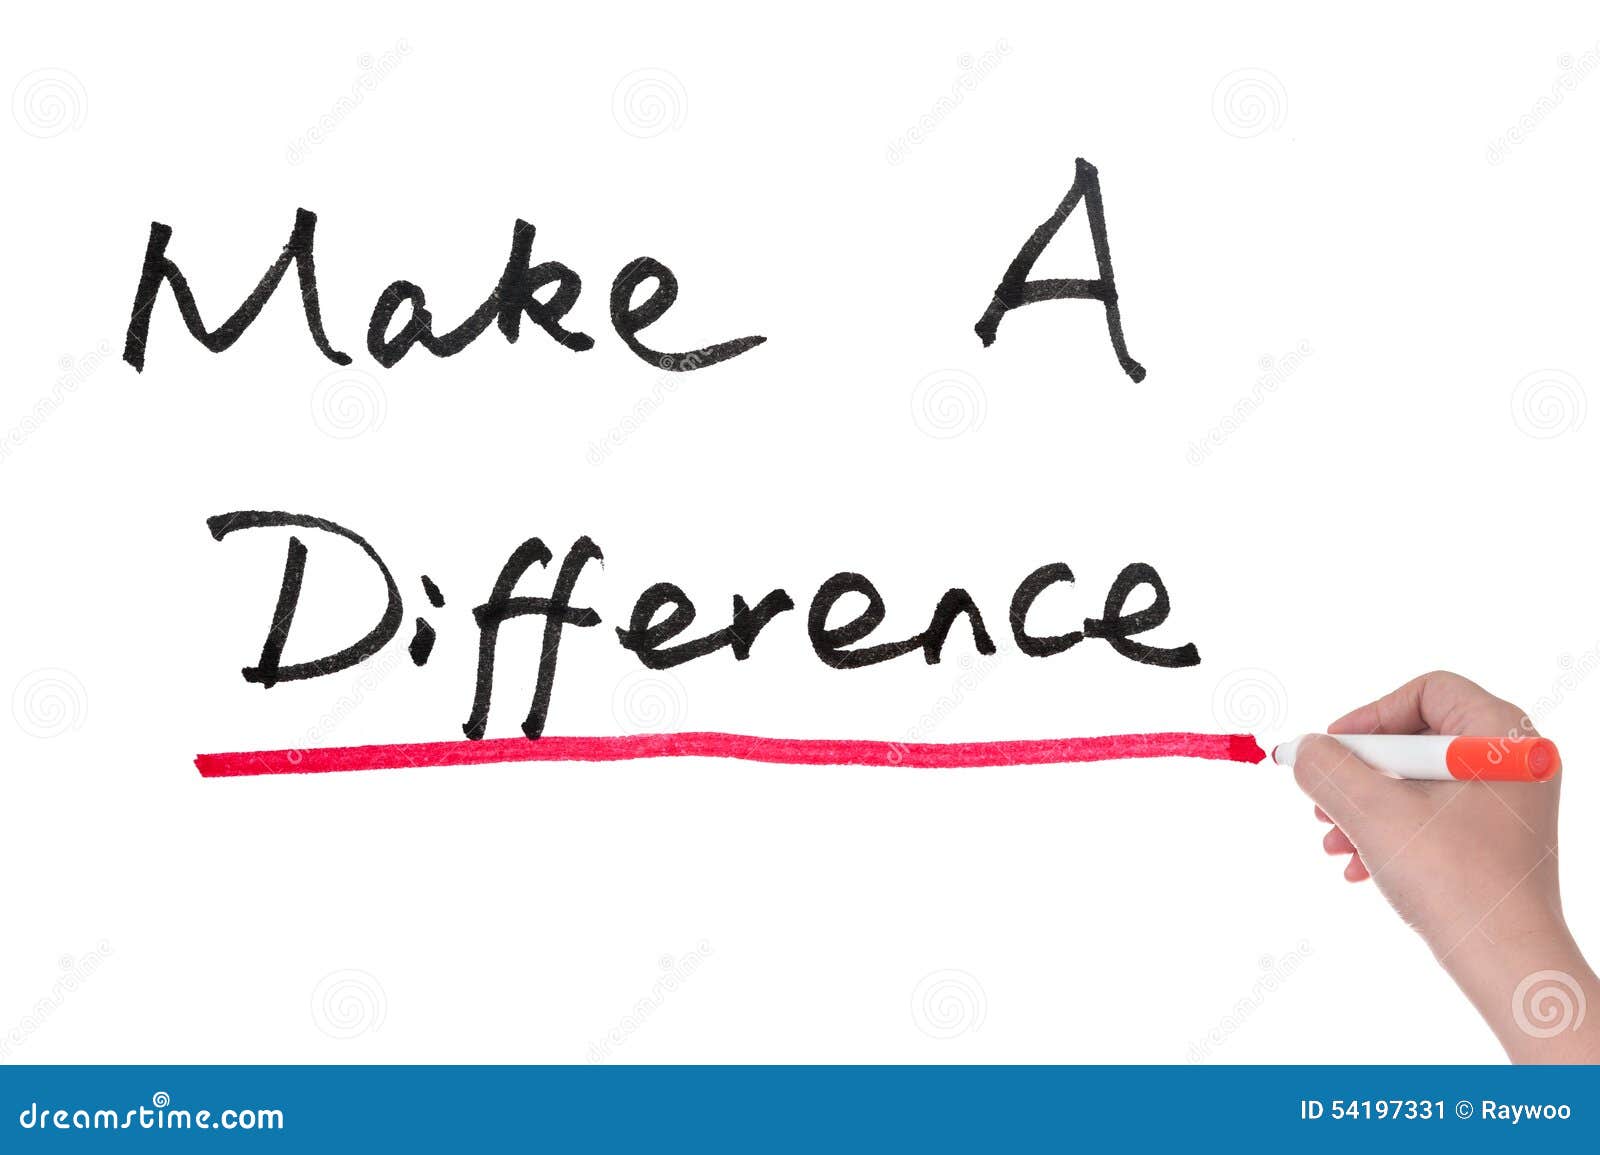 Make A Difference Stock Image Image Of Motivation - 